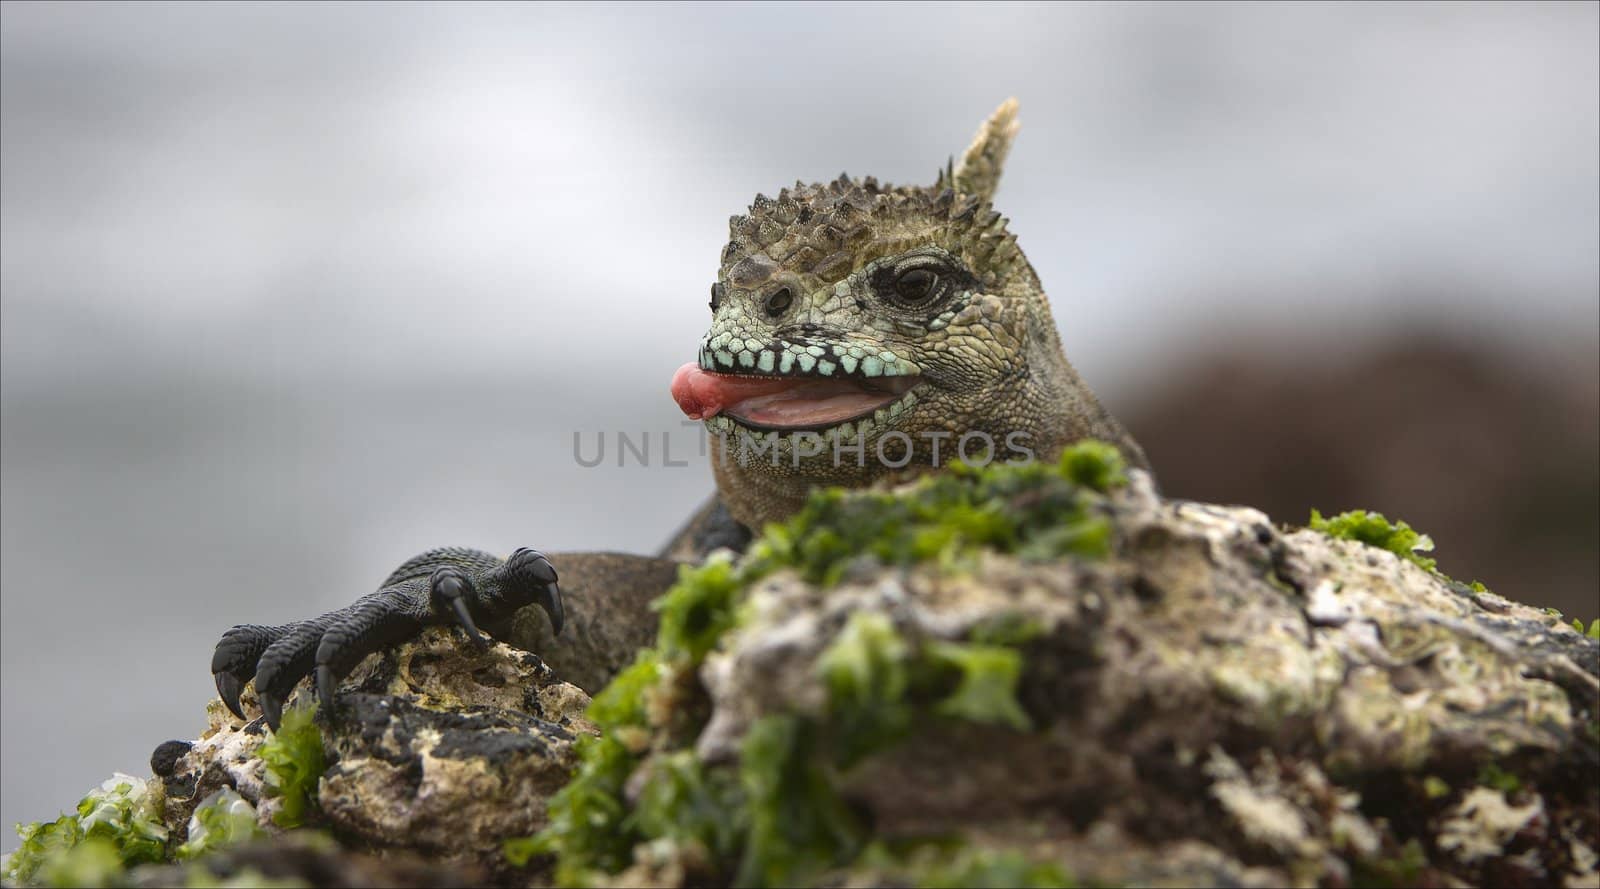 The sea iguana has got out on coastal boulders in search of food.The Marine Iguana (Amblyrhynchus cristatus) is an iguana found only on the Galapagos Islands 